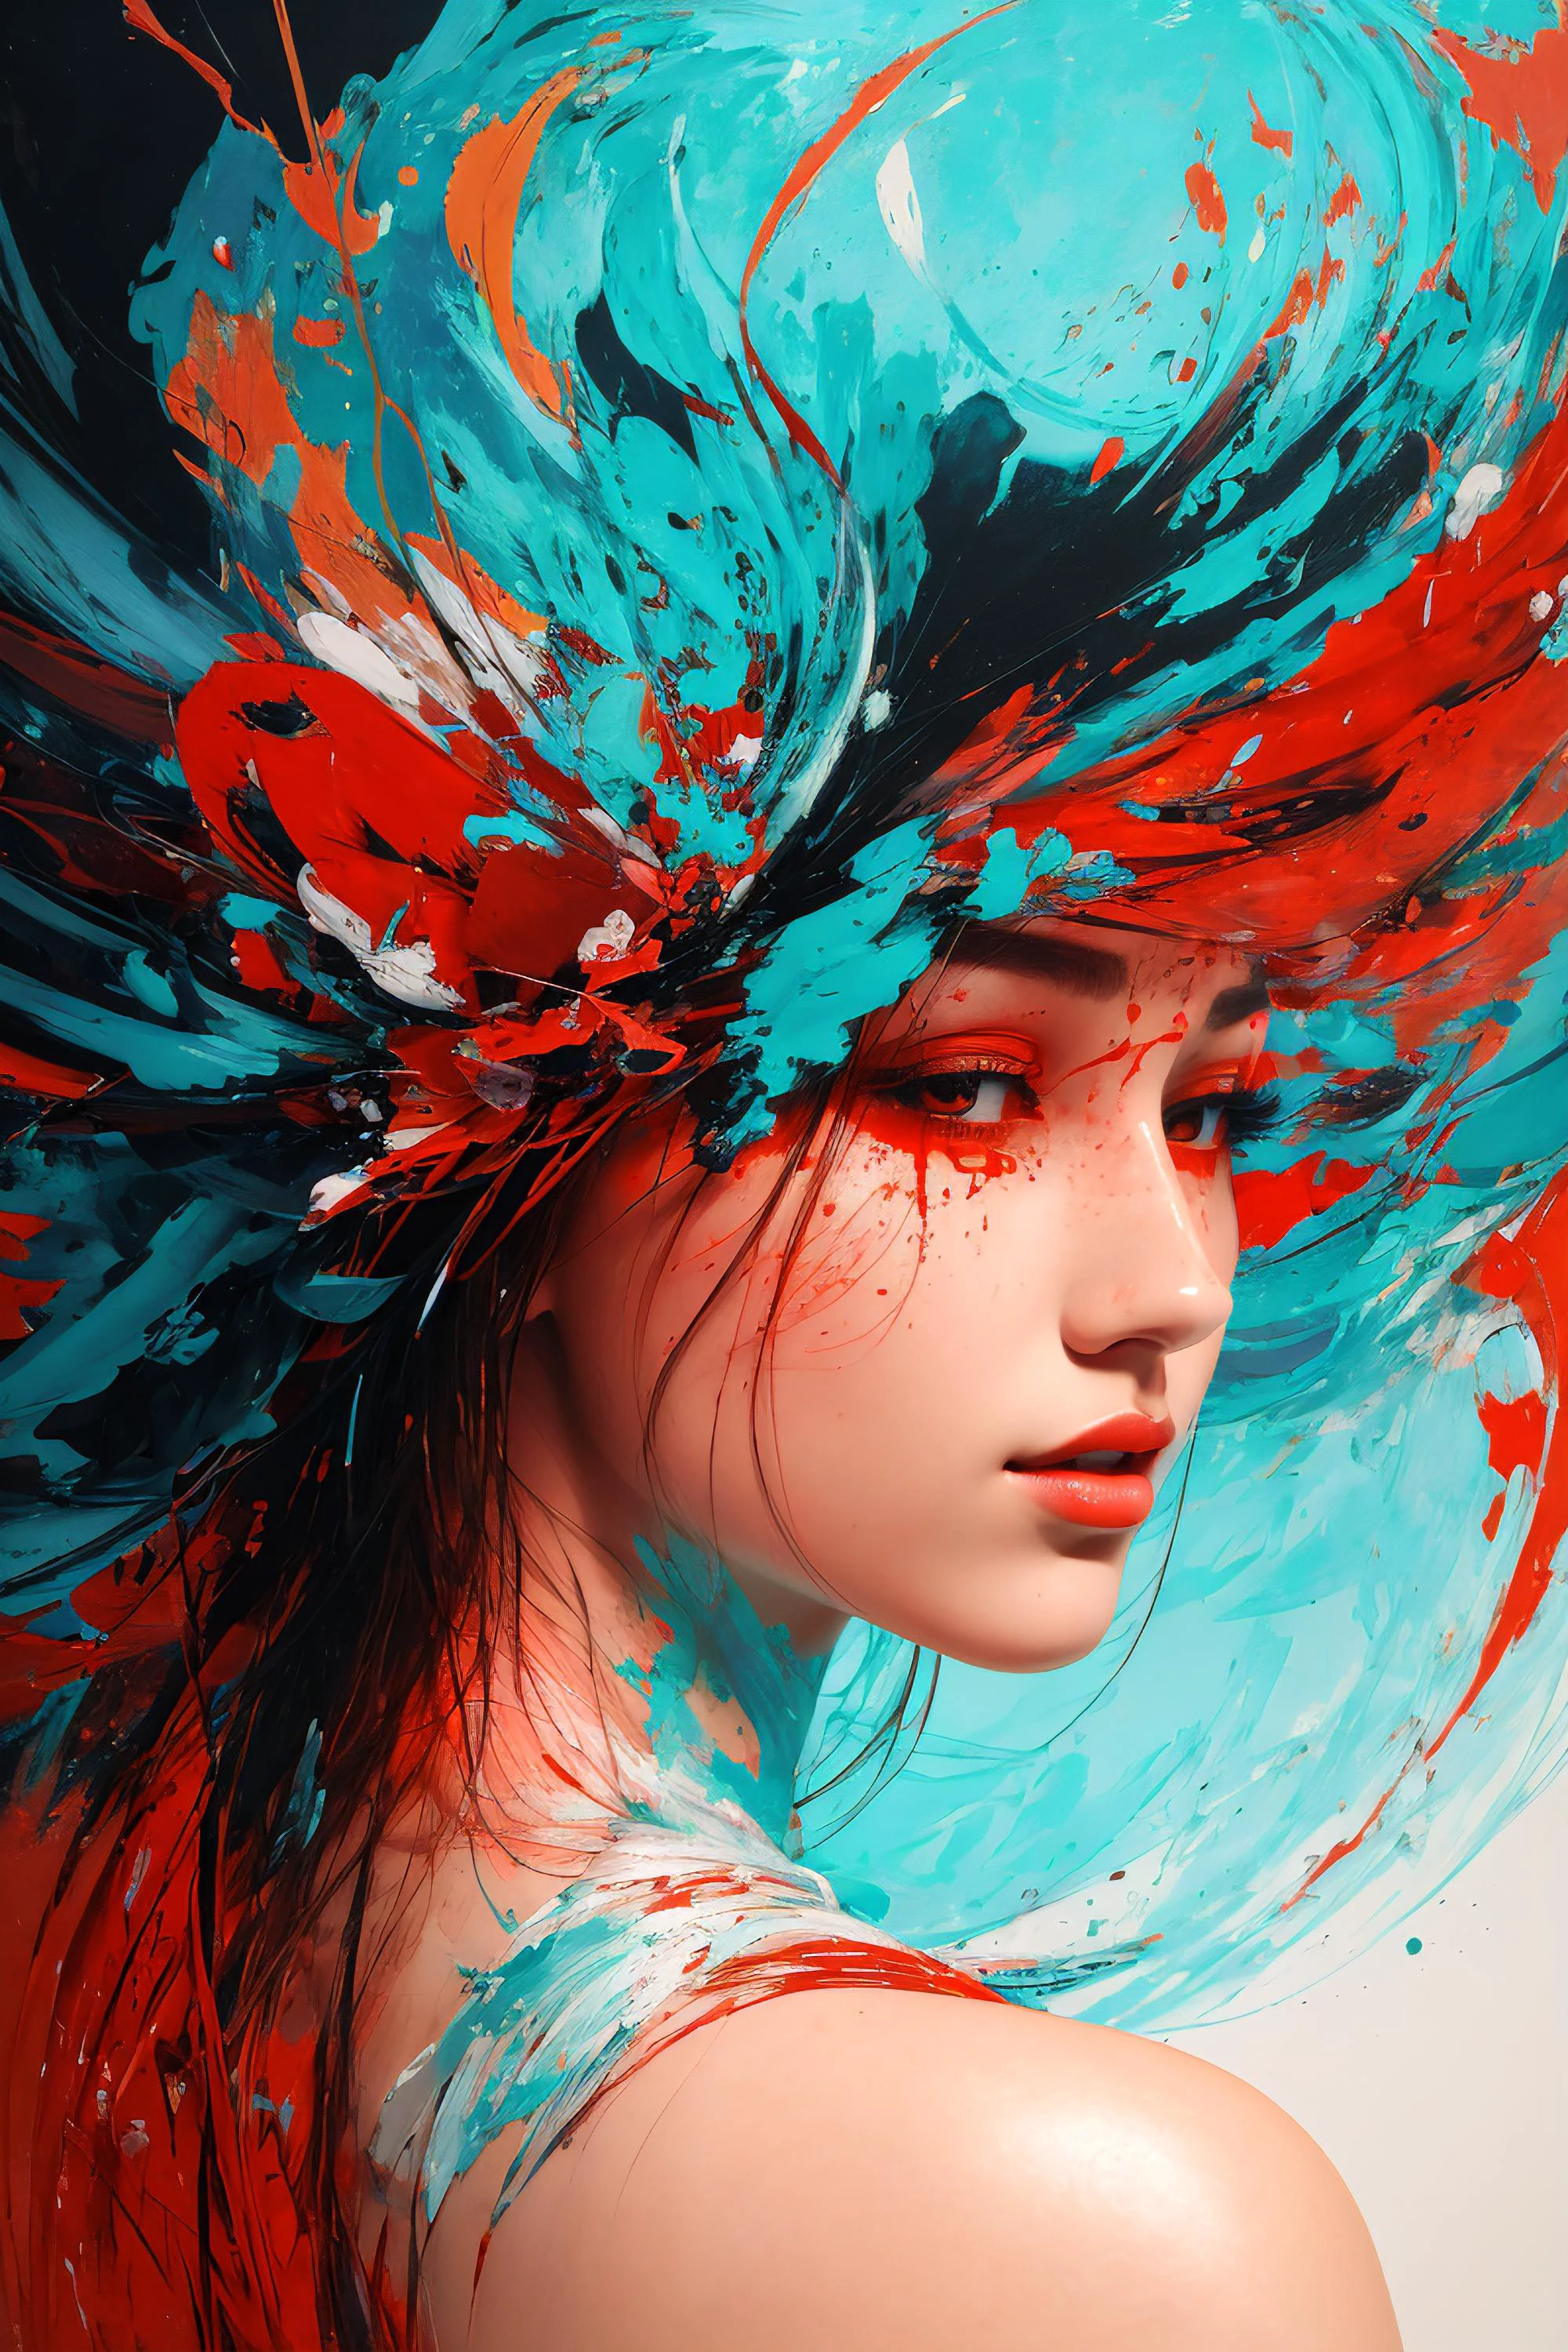 masterpiece, best quality, ultra high res, 1girl, (abstract art:1.4), cinematic, bleeding red, (cyan and orange theme), visually stunning, beautiful, evocative, emotional, side view, perfect lighting, perfect shading, volumetric lighting, subsurface scattering, (beautiful face), gorgeous, stunning, (intricate, detailed), (photorealistic:1.6), (mature adult:1.37), (abstract expressionism:0.25), seductive, sexy, flowers:0.3,